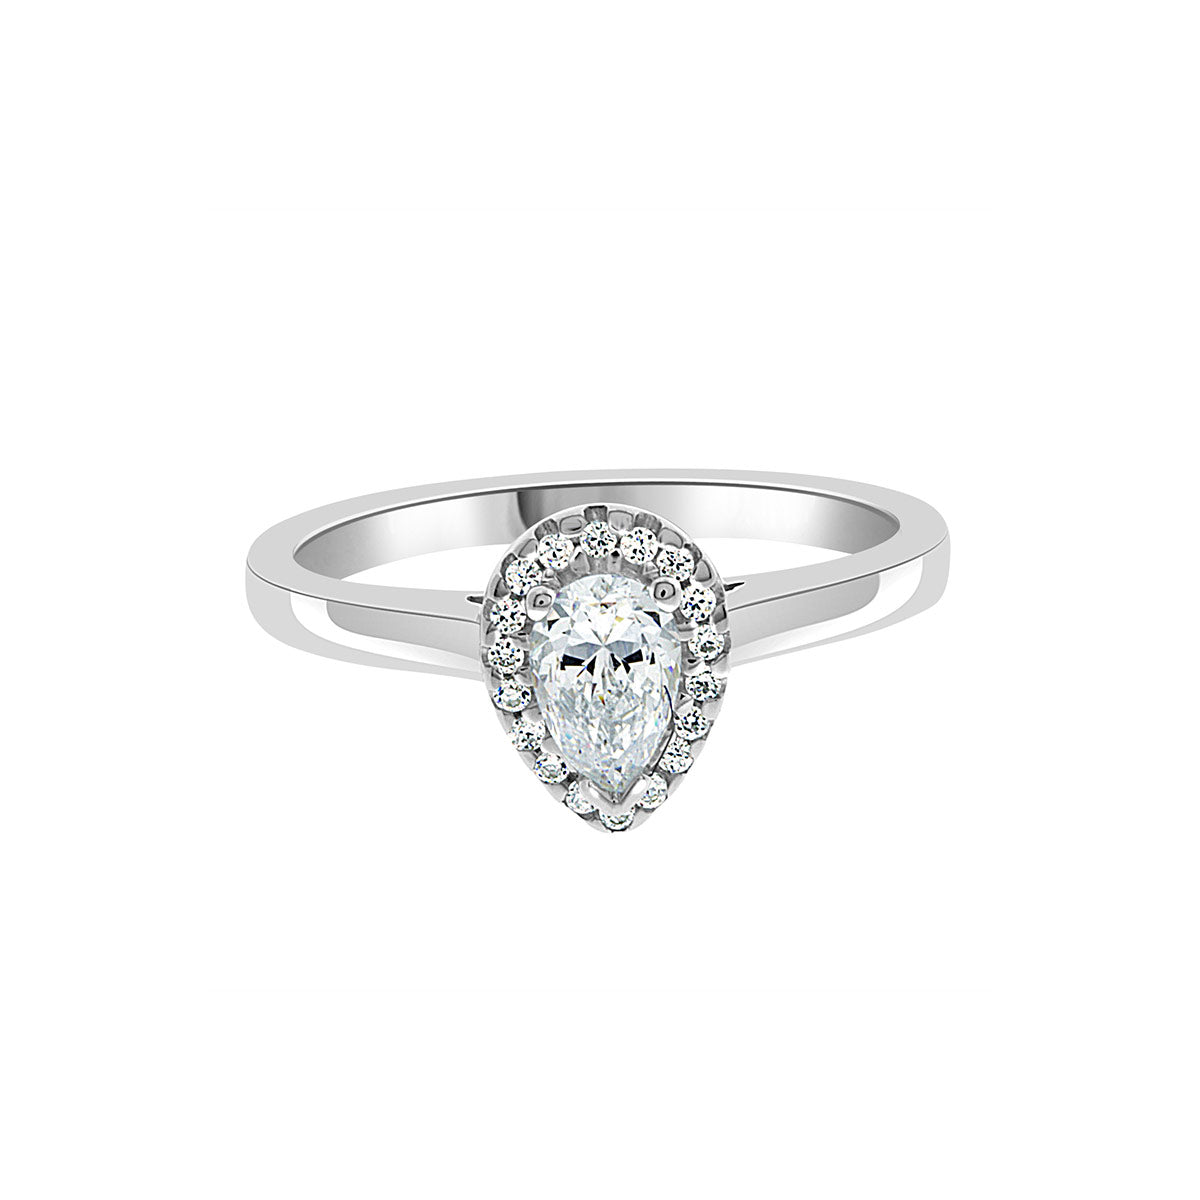 Vintage Engagement Ring with Pear Shape Diamond made from platinum, on a white background